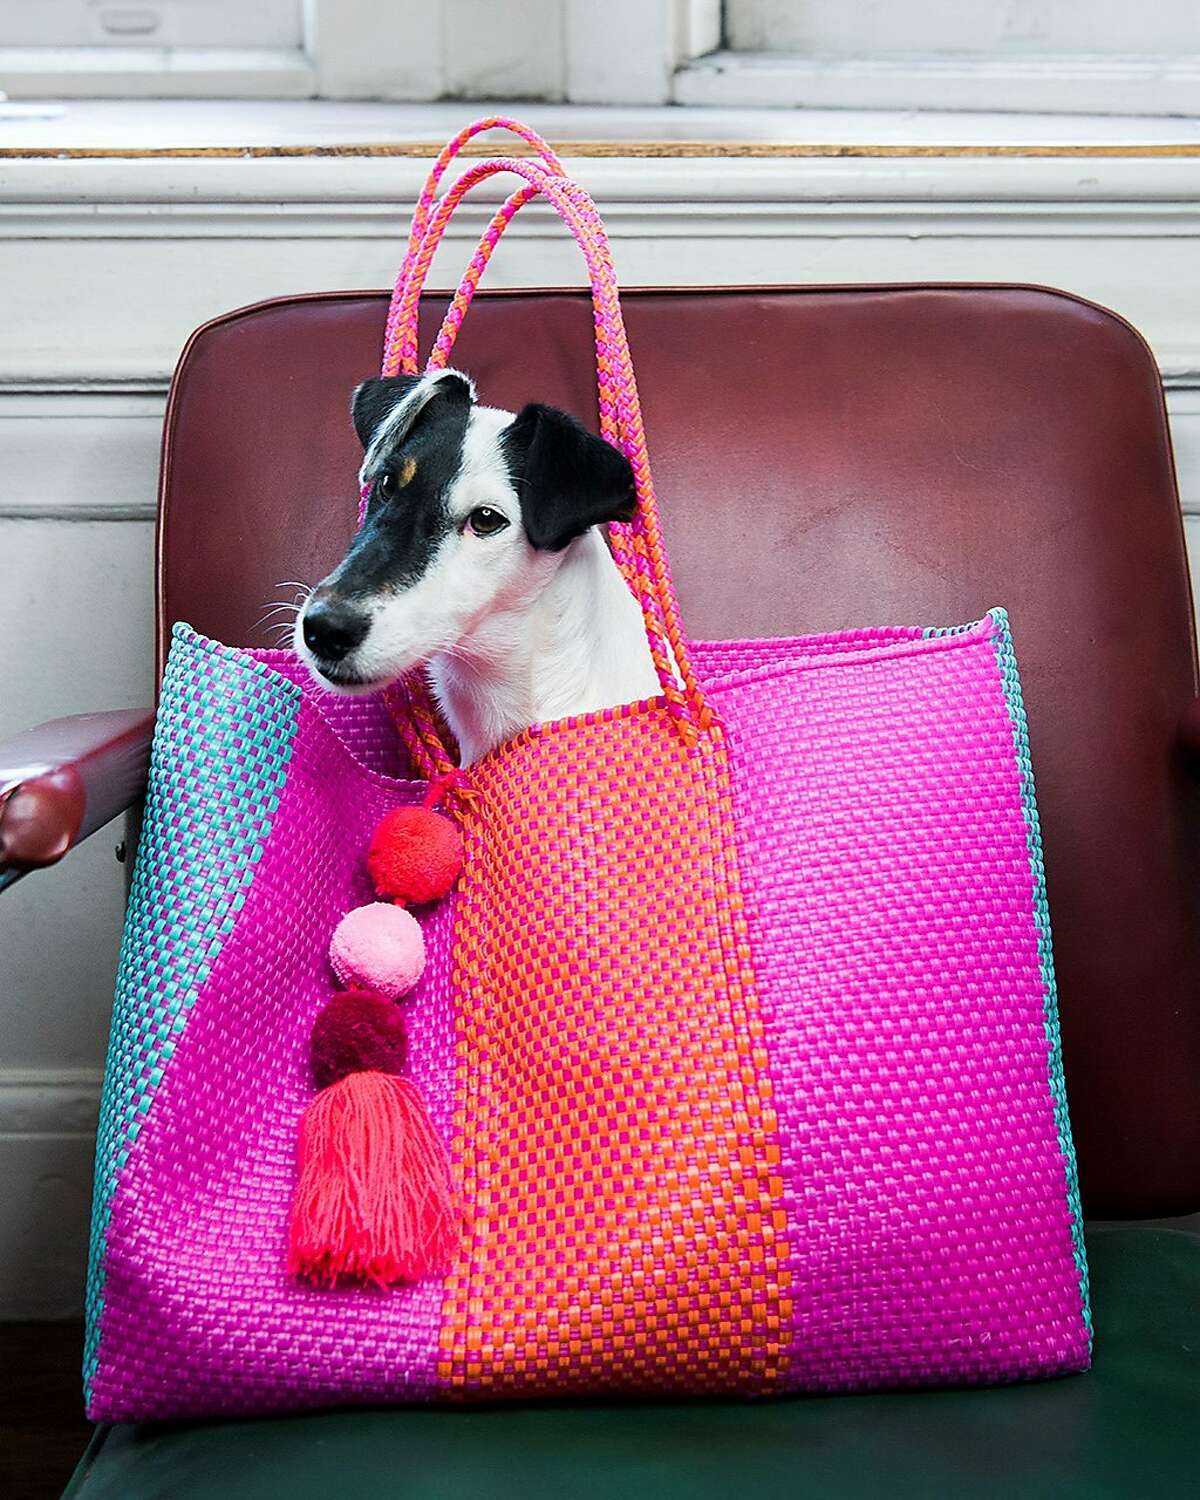 The author's dog, Stella, poses in her Anna bag.